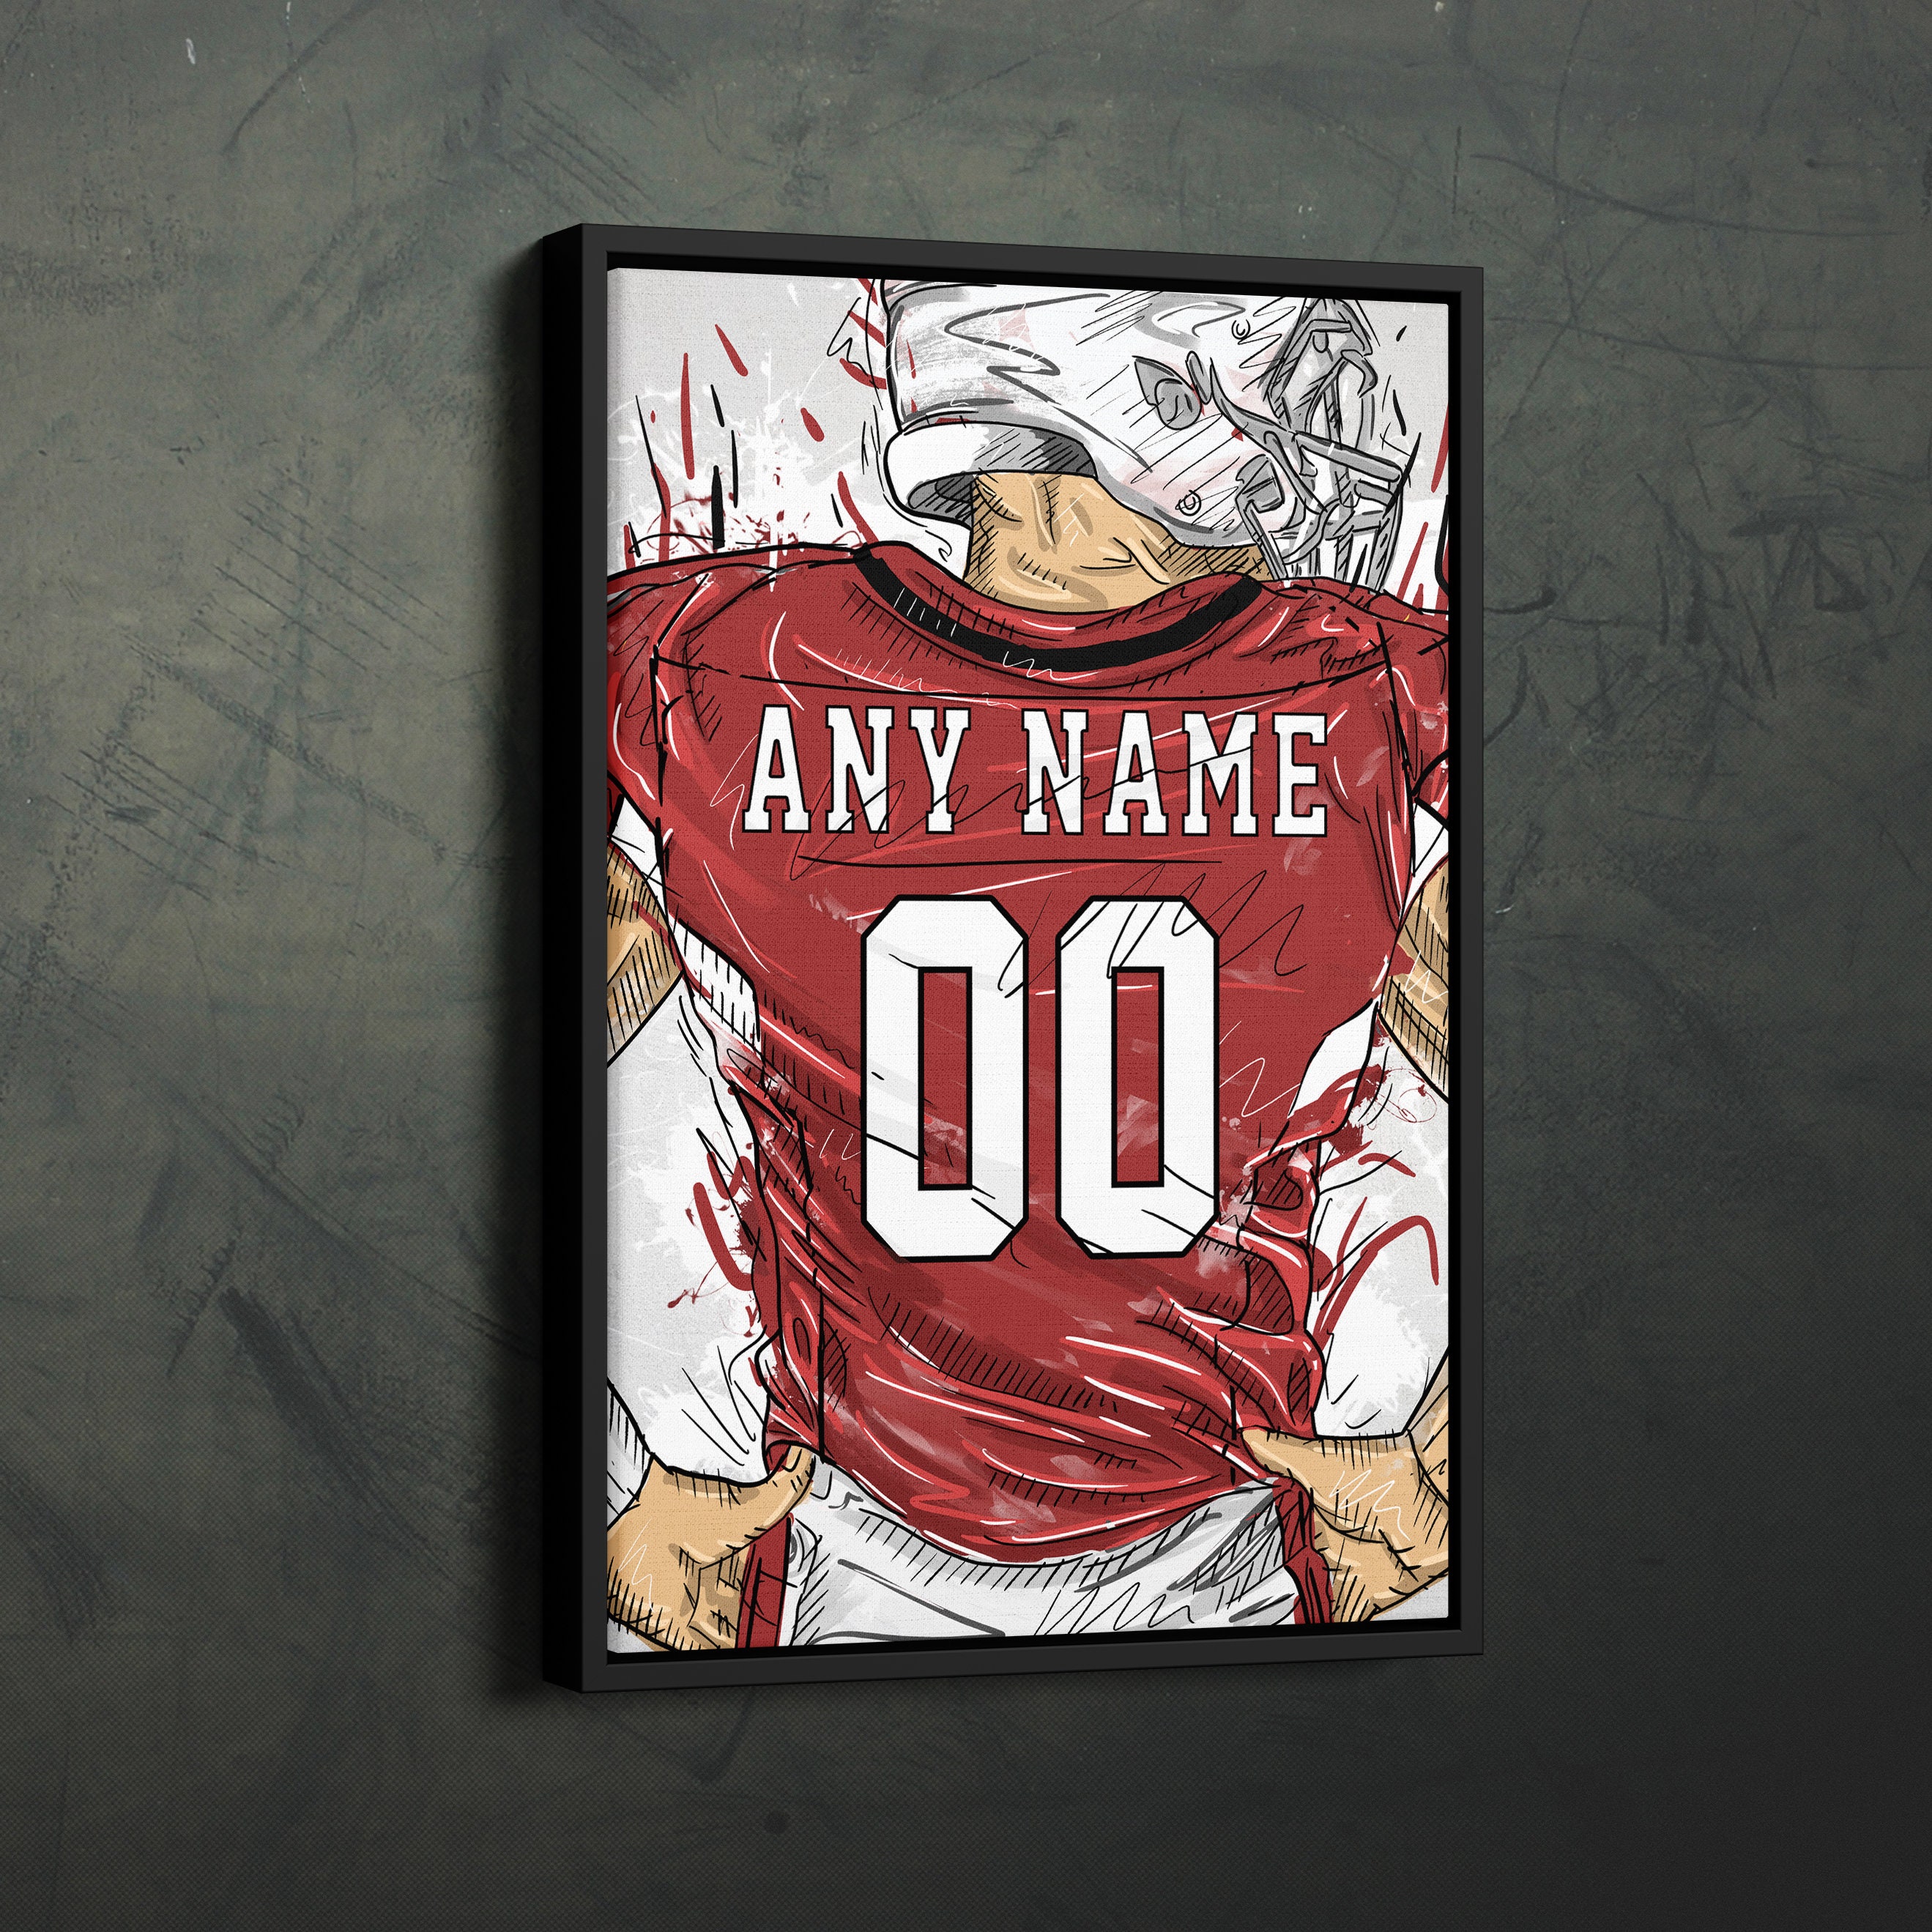 Football Jersey Framing - High School+ Age/Size - Beautiful High End Display